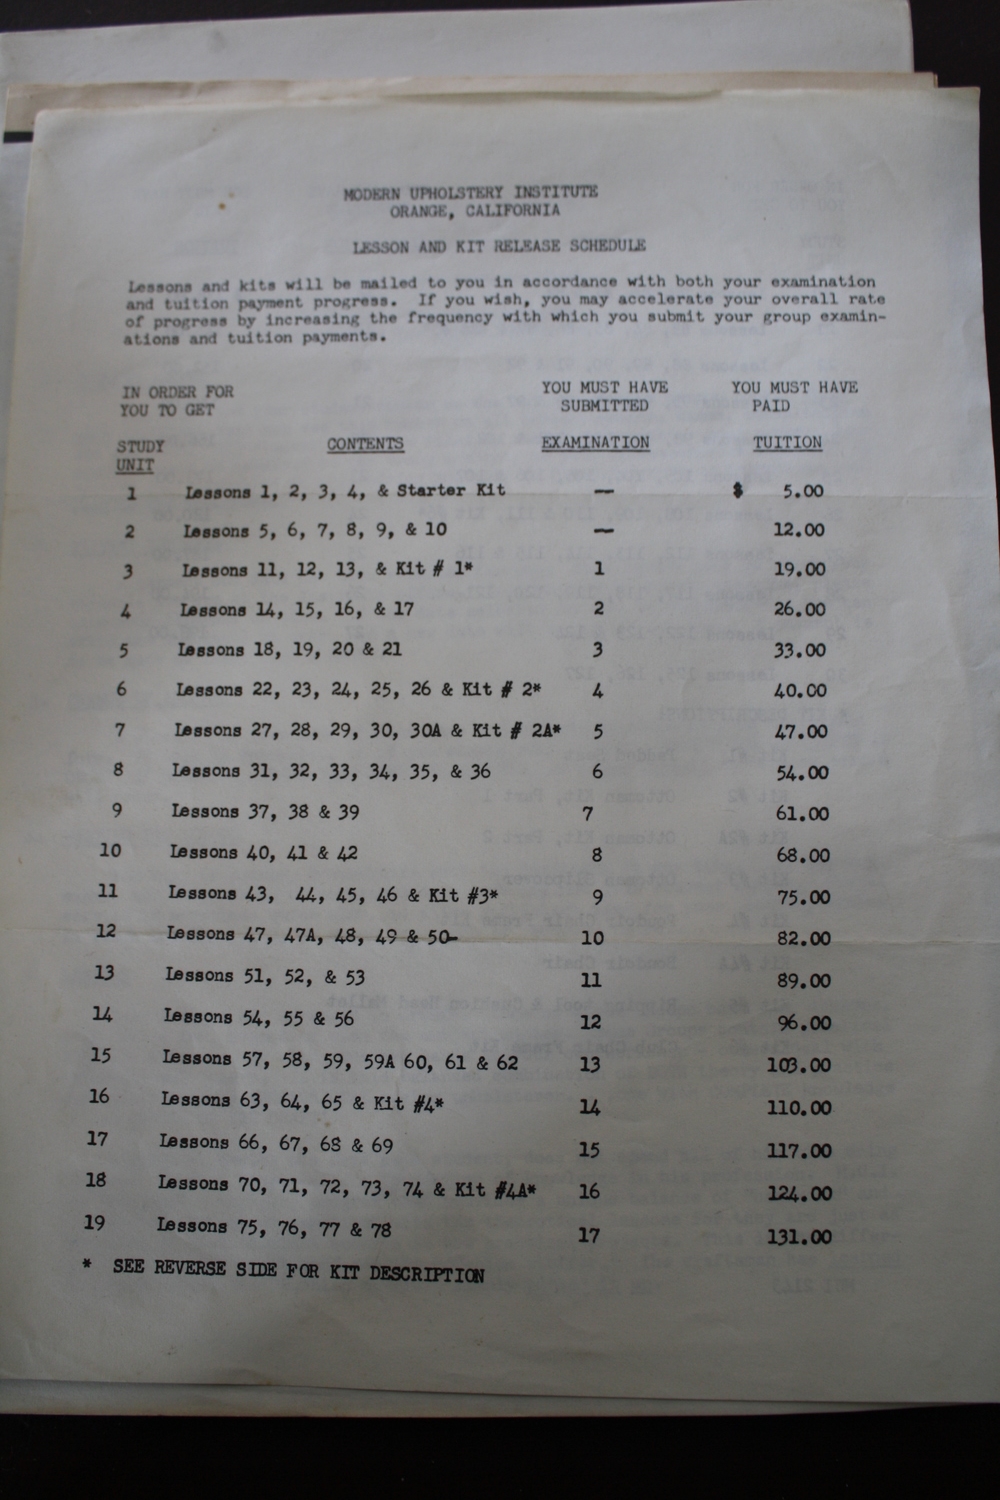 The Modern Upholstery Institute price list.